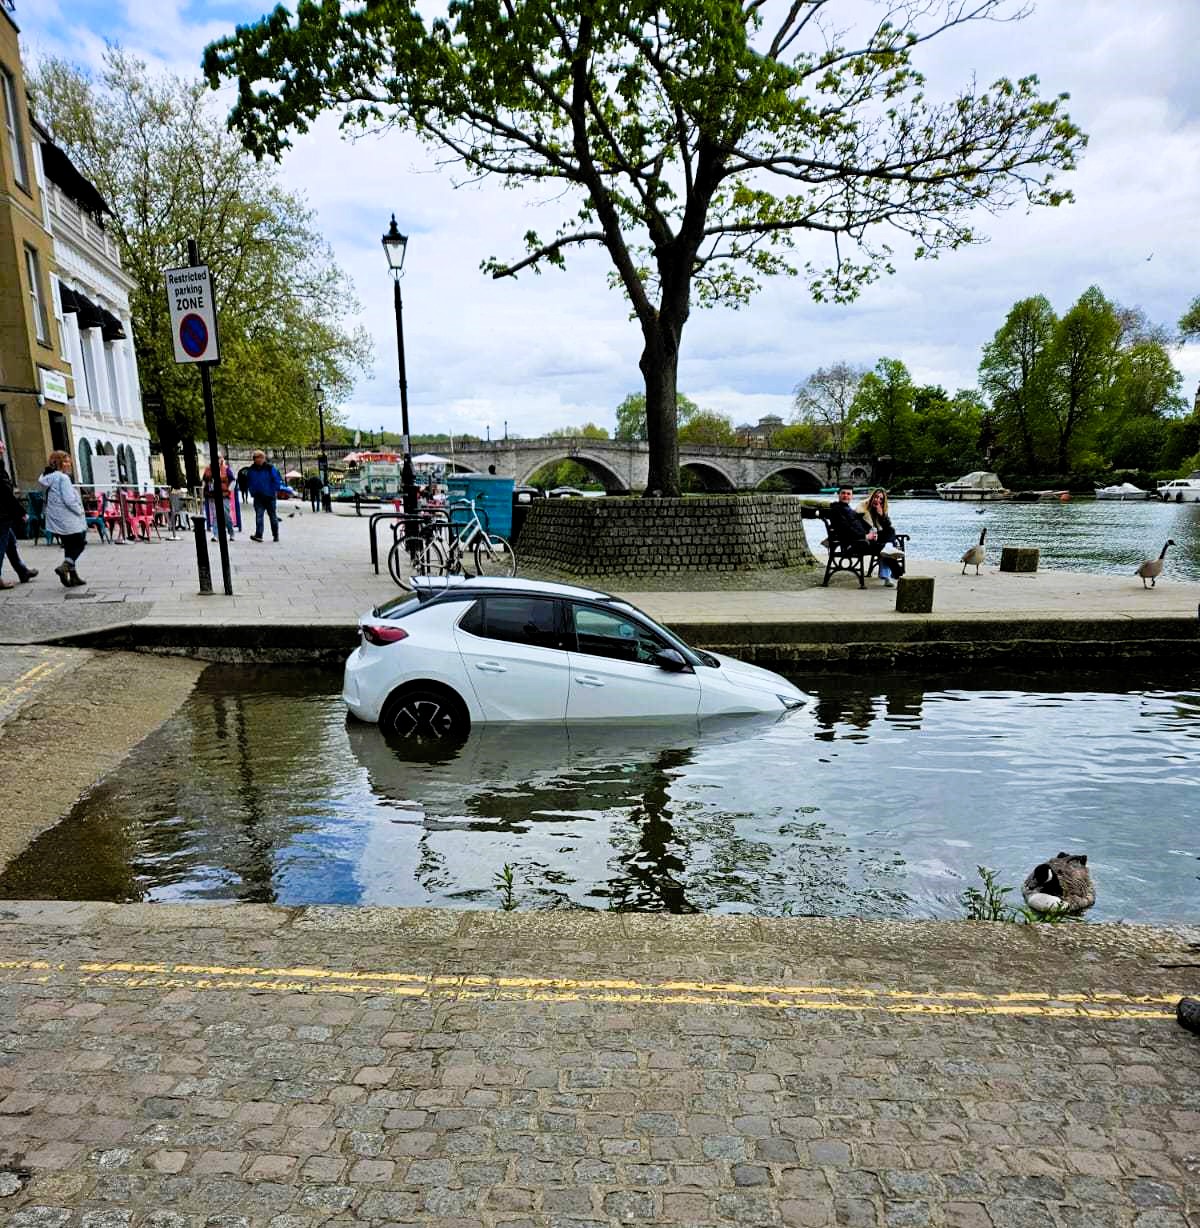 A driver's mishap leaves their car submerged underwater after parking on a river slipway in Richmond. Firefighters rescue the stranded vehicle.